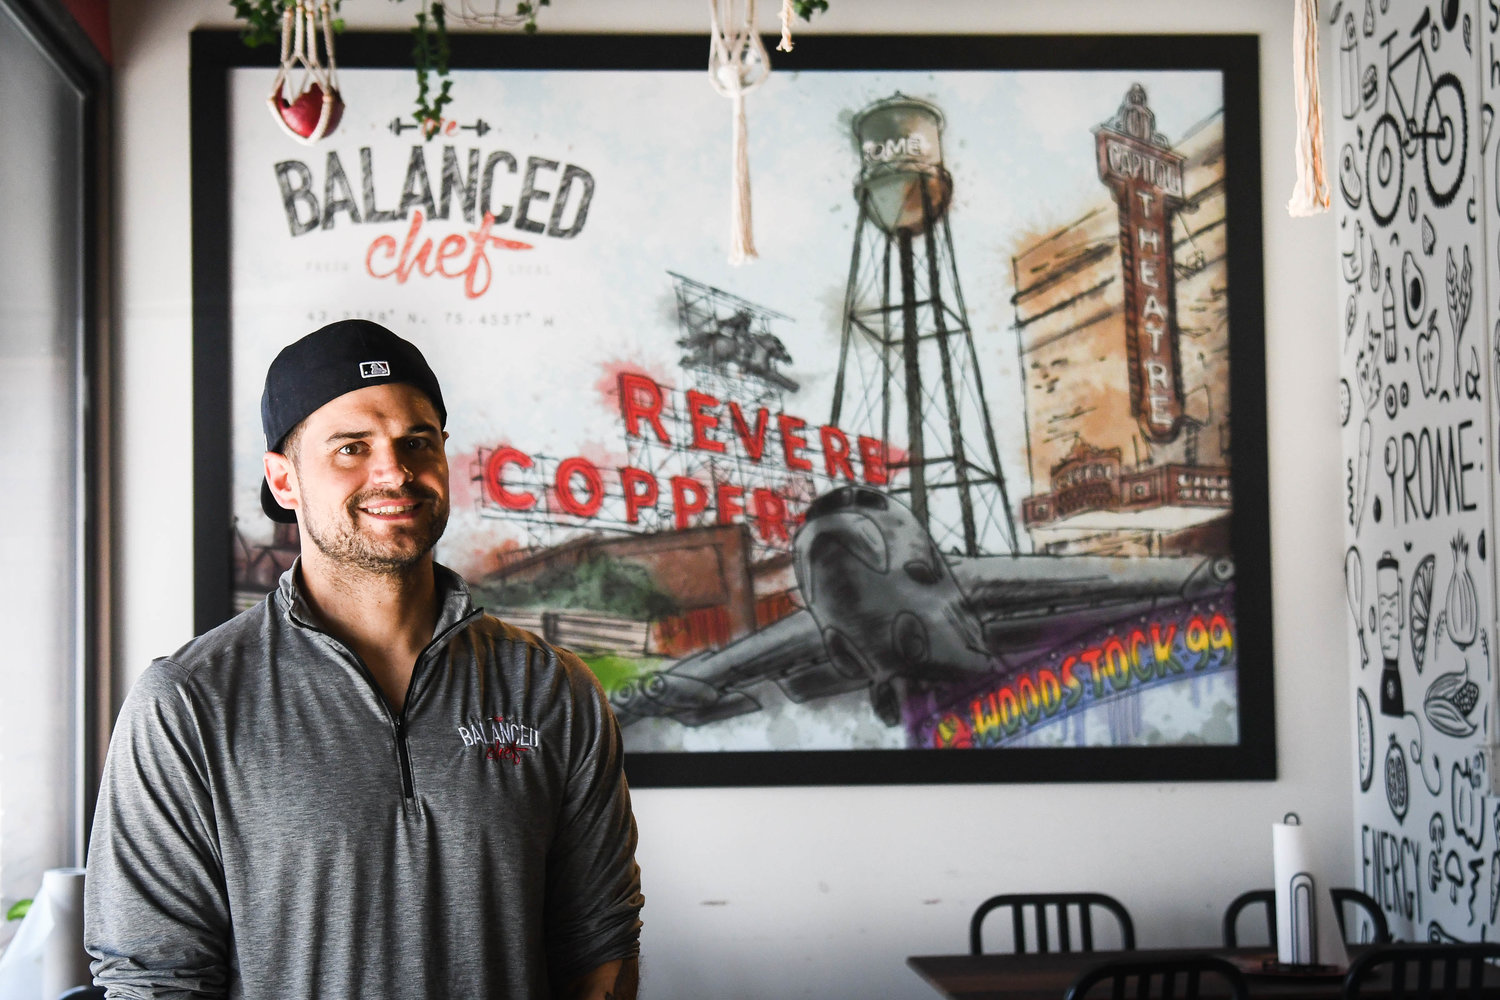 Brian Donovan, founder of The Balenced Chef, has been in business since 2015 and has provided readily available, healthy fast food for people in the area and state.